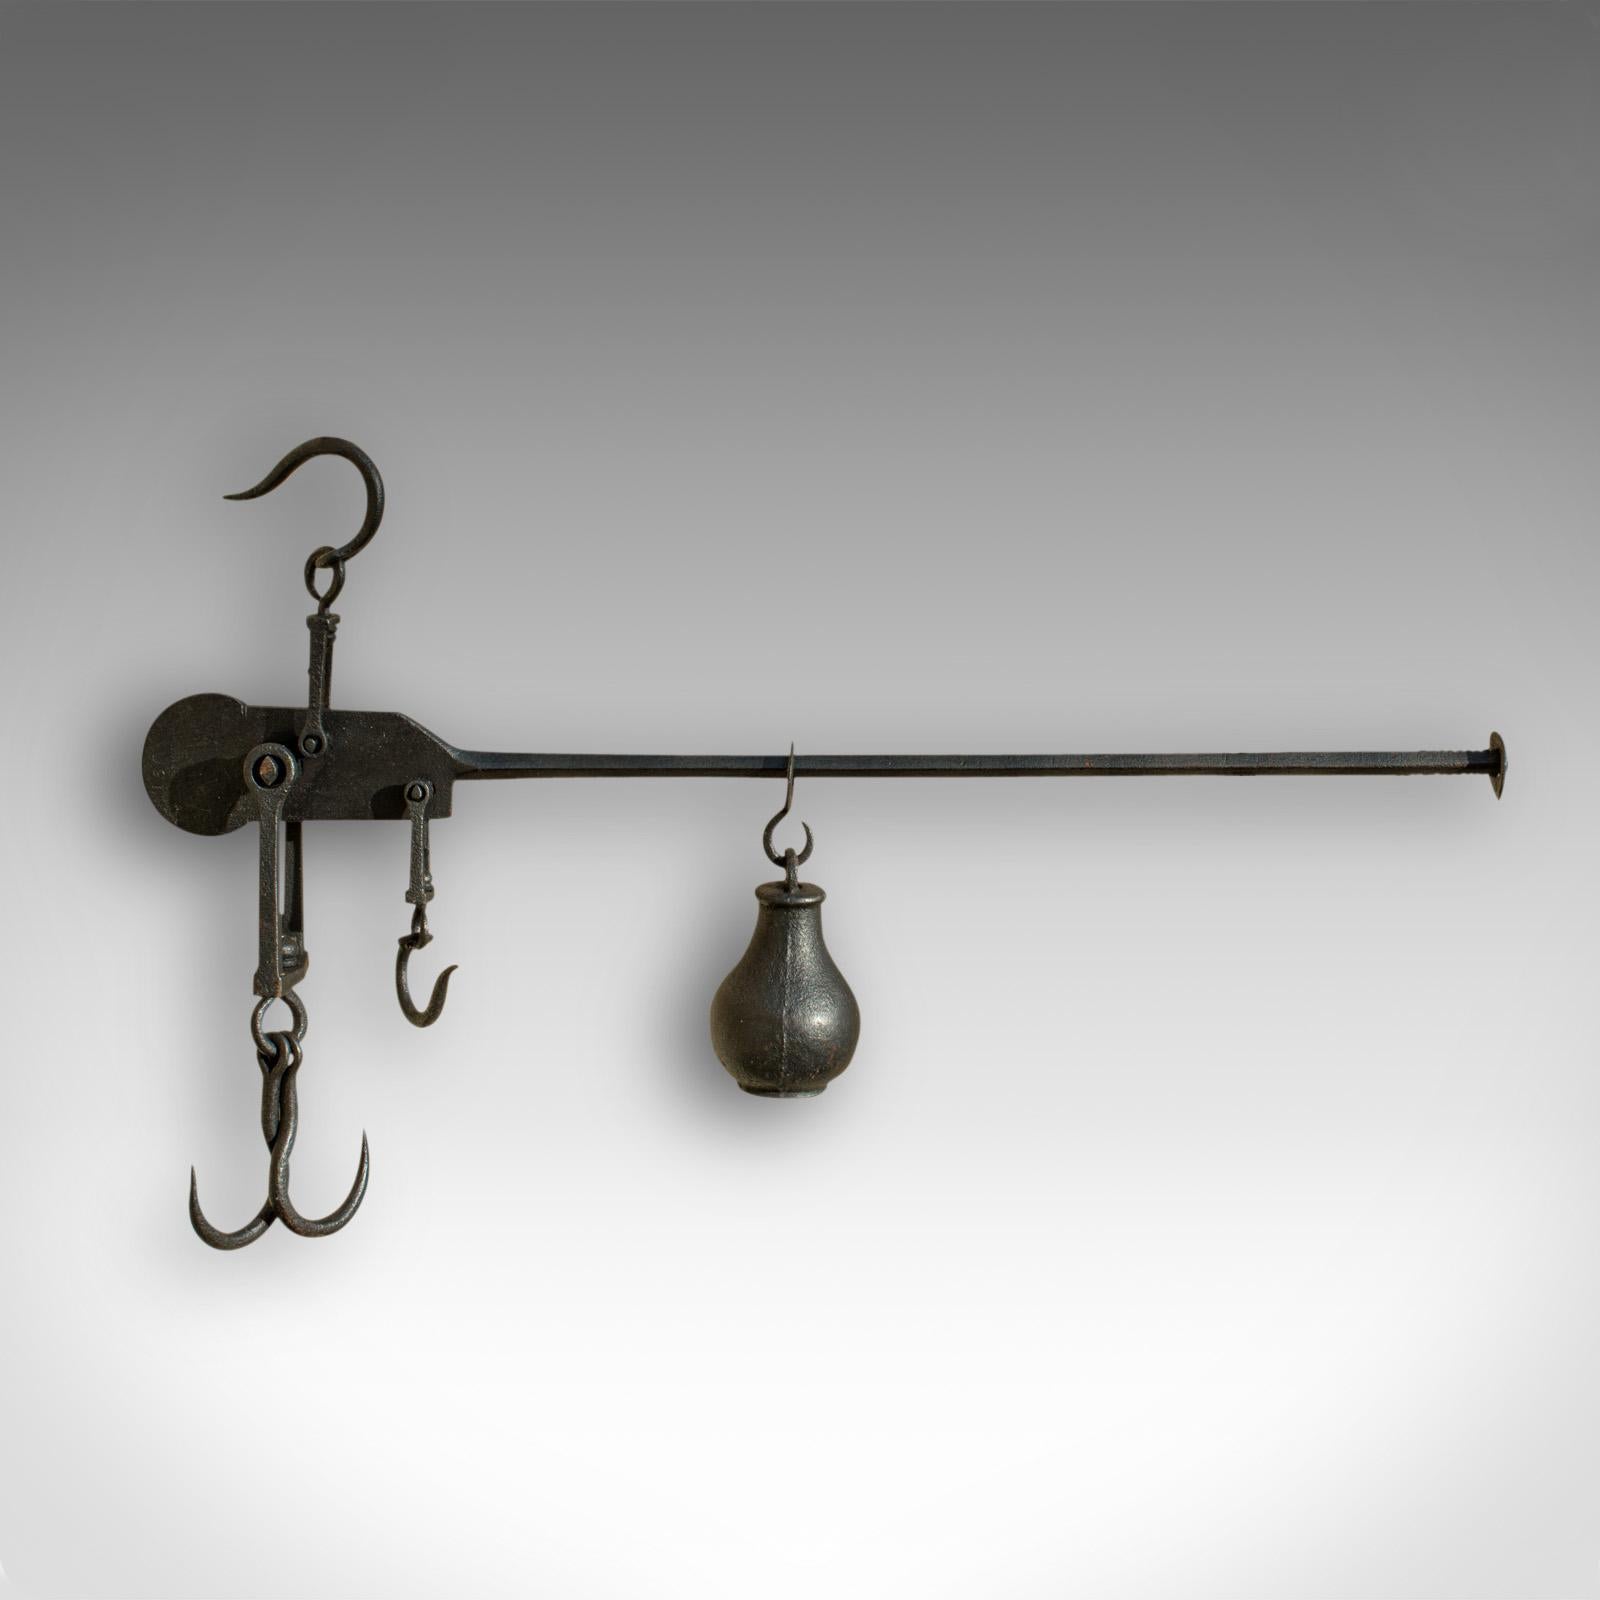 This is an antique decorative butcher's steelyard. An English, cast iron weighing instrument, dating to the late 18th century, circa 1800.

Decorative hanging piece with countryside appeal
Displays a desirable aged patina
Cast iron presented